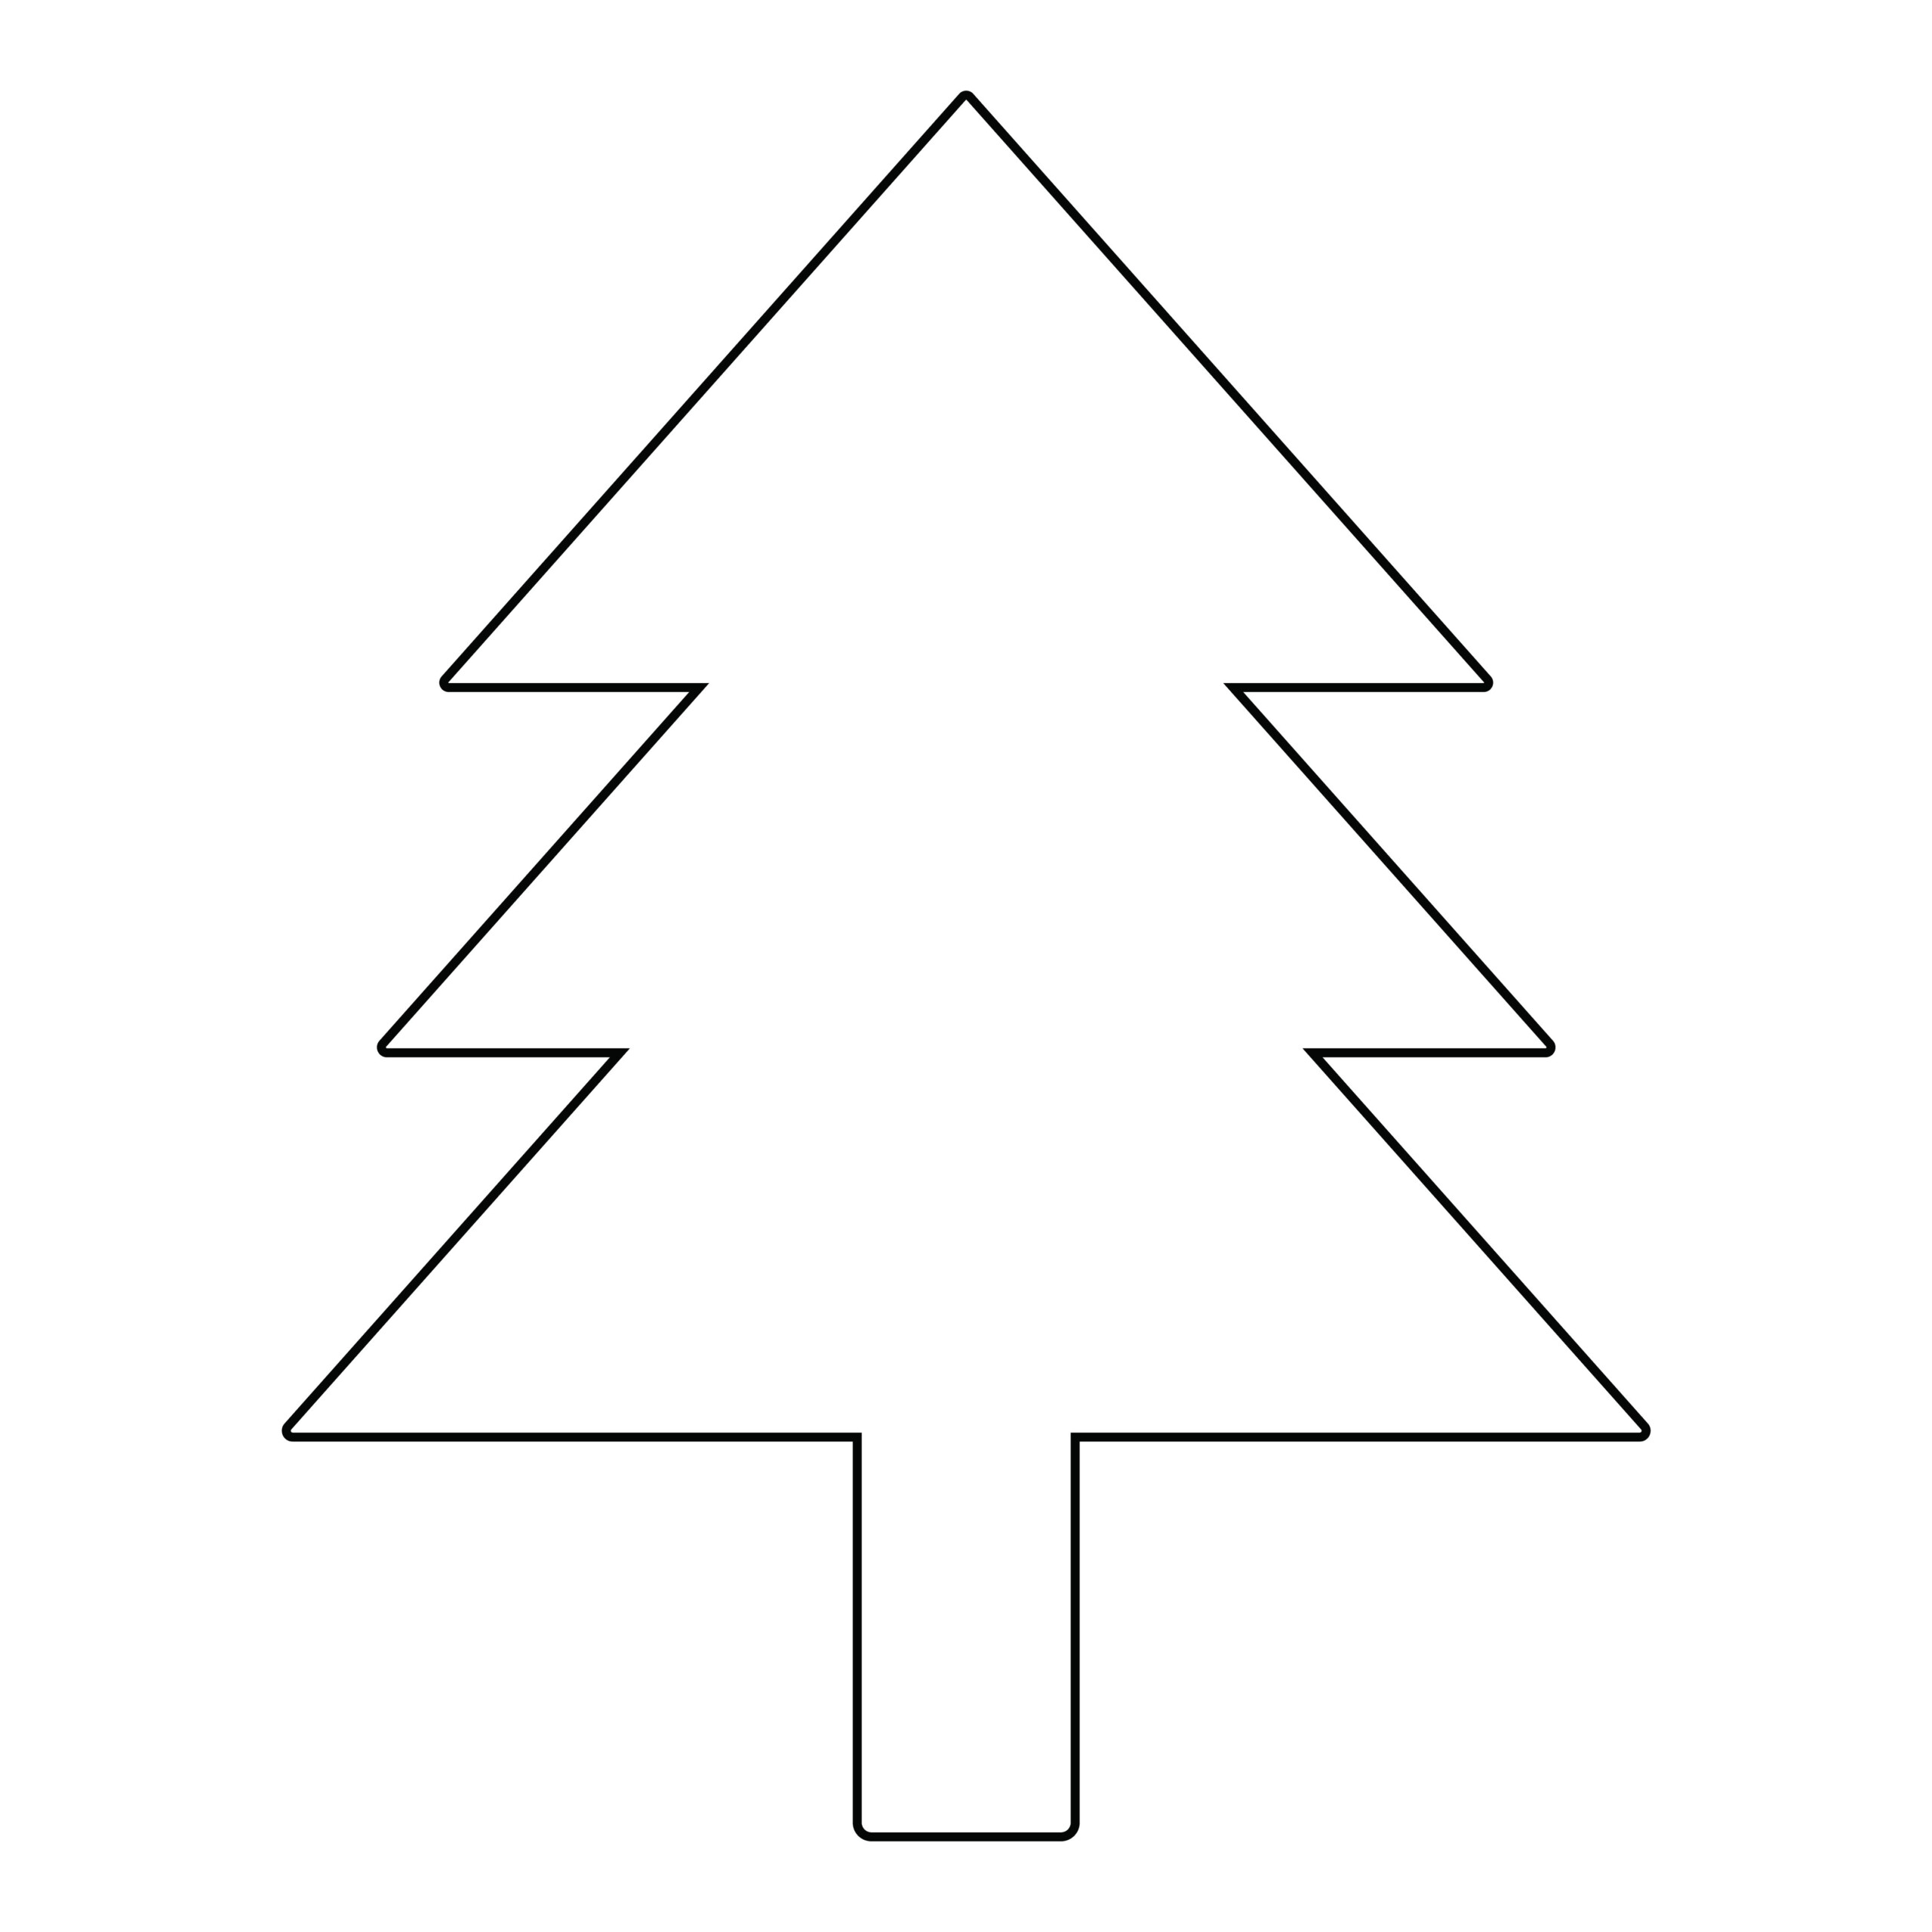 Free Christmas Tree Templates For Sewing FREE PRINTABLE TEMPLATES